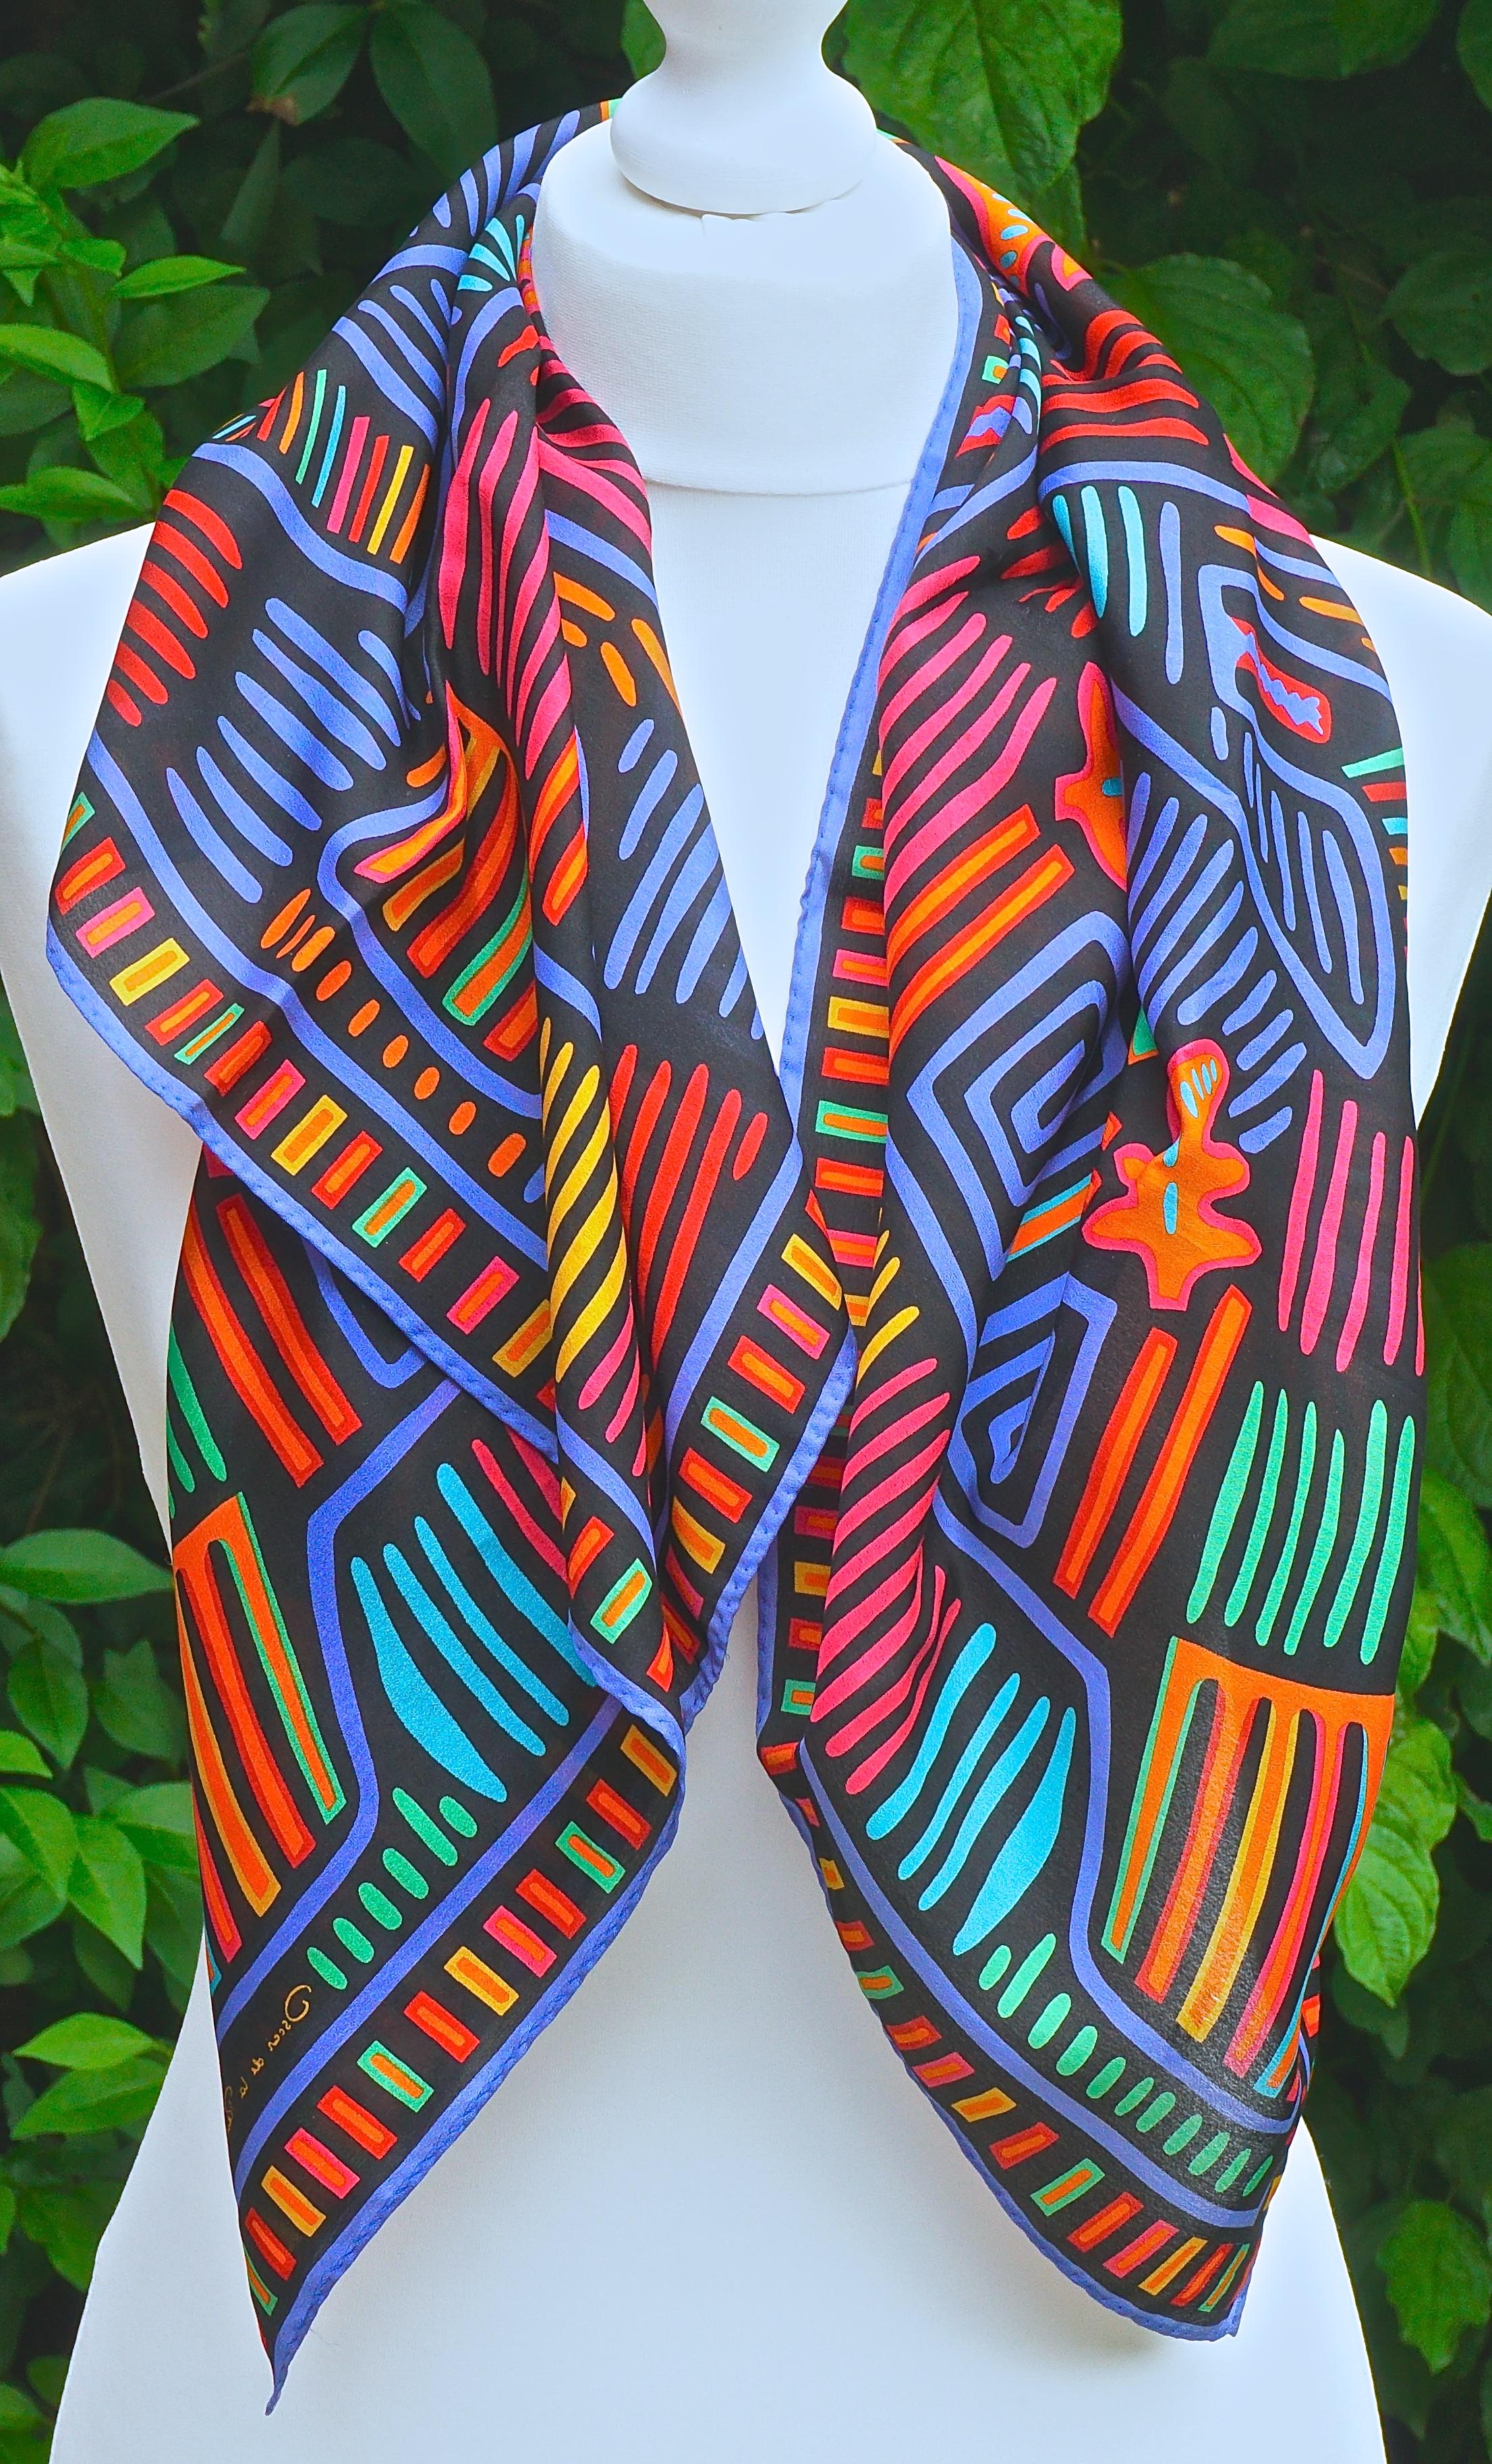 Square Oscar de la Renta for Accessory Street pure silk scarf featuring a lovely multi coloured abstract print on a black background. Measuring approximately 78.74cm / 31 inches square. The scarf is in very good condition, made in Japan.

This